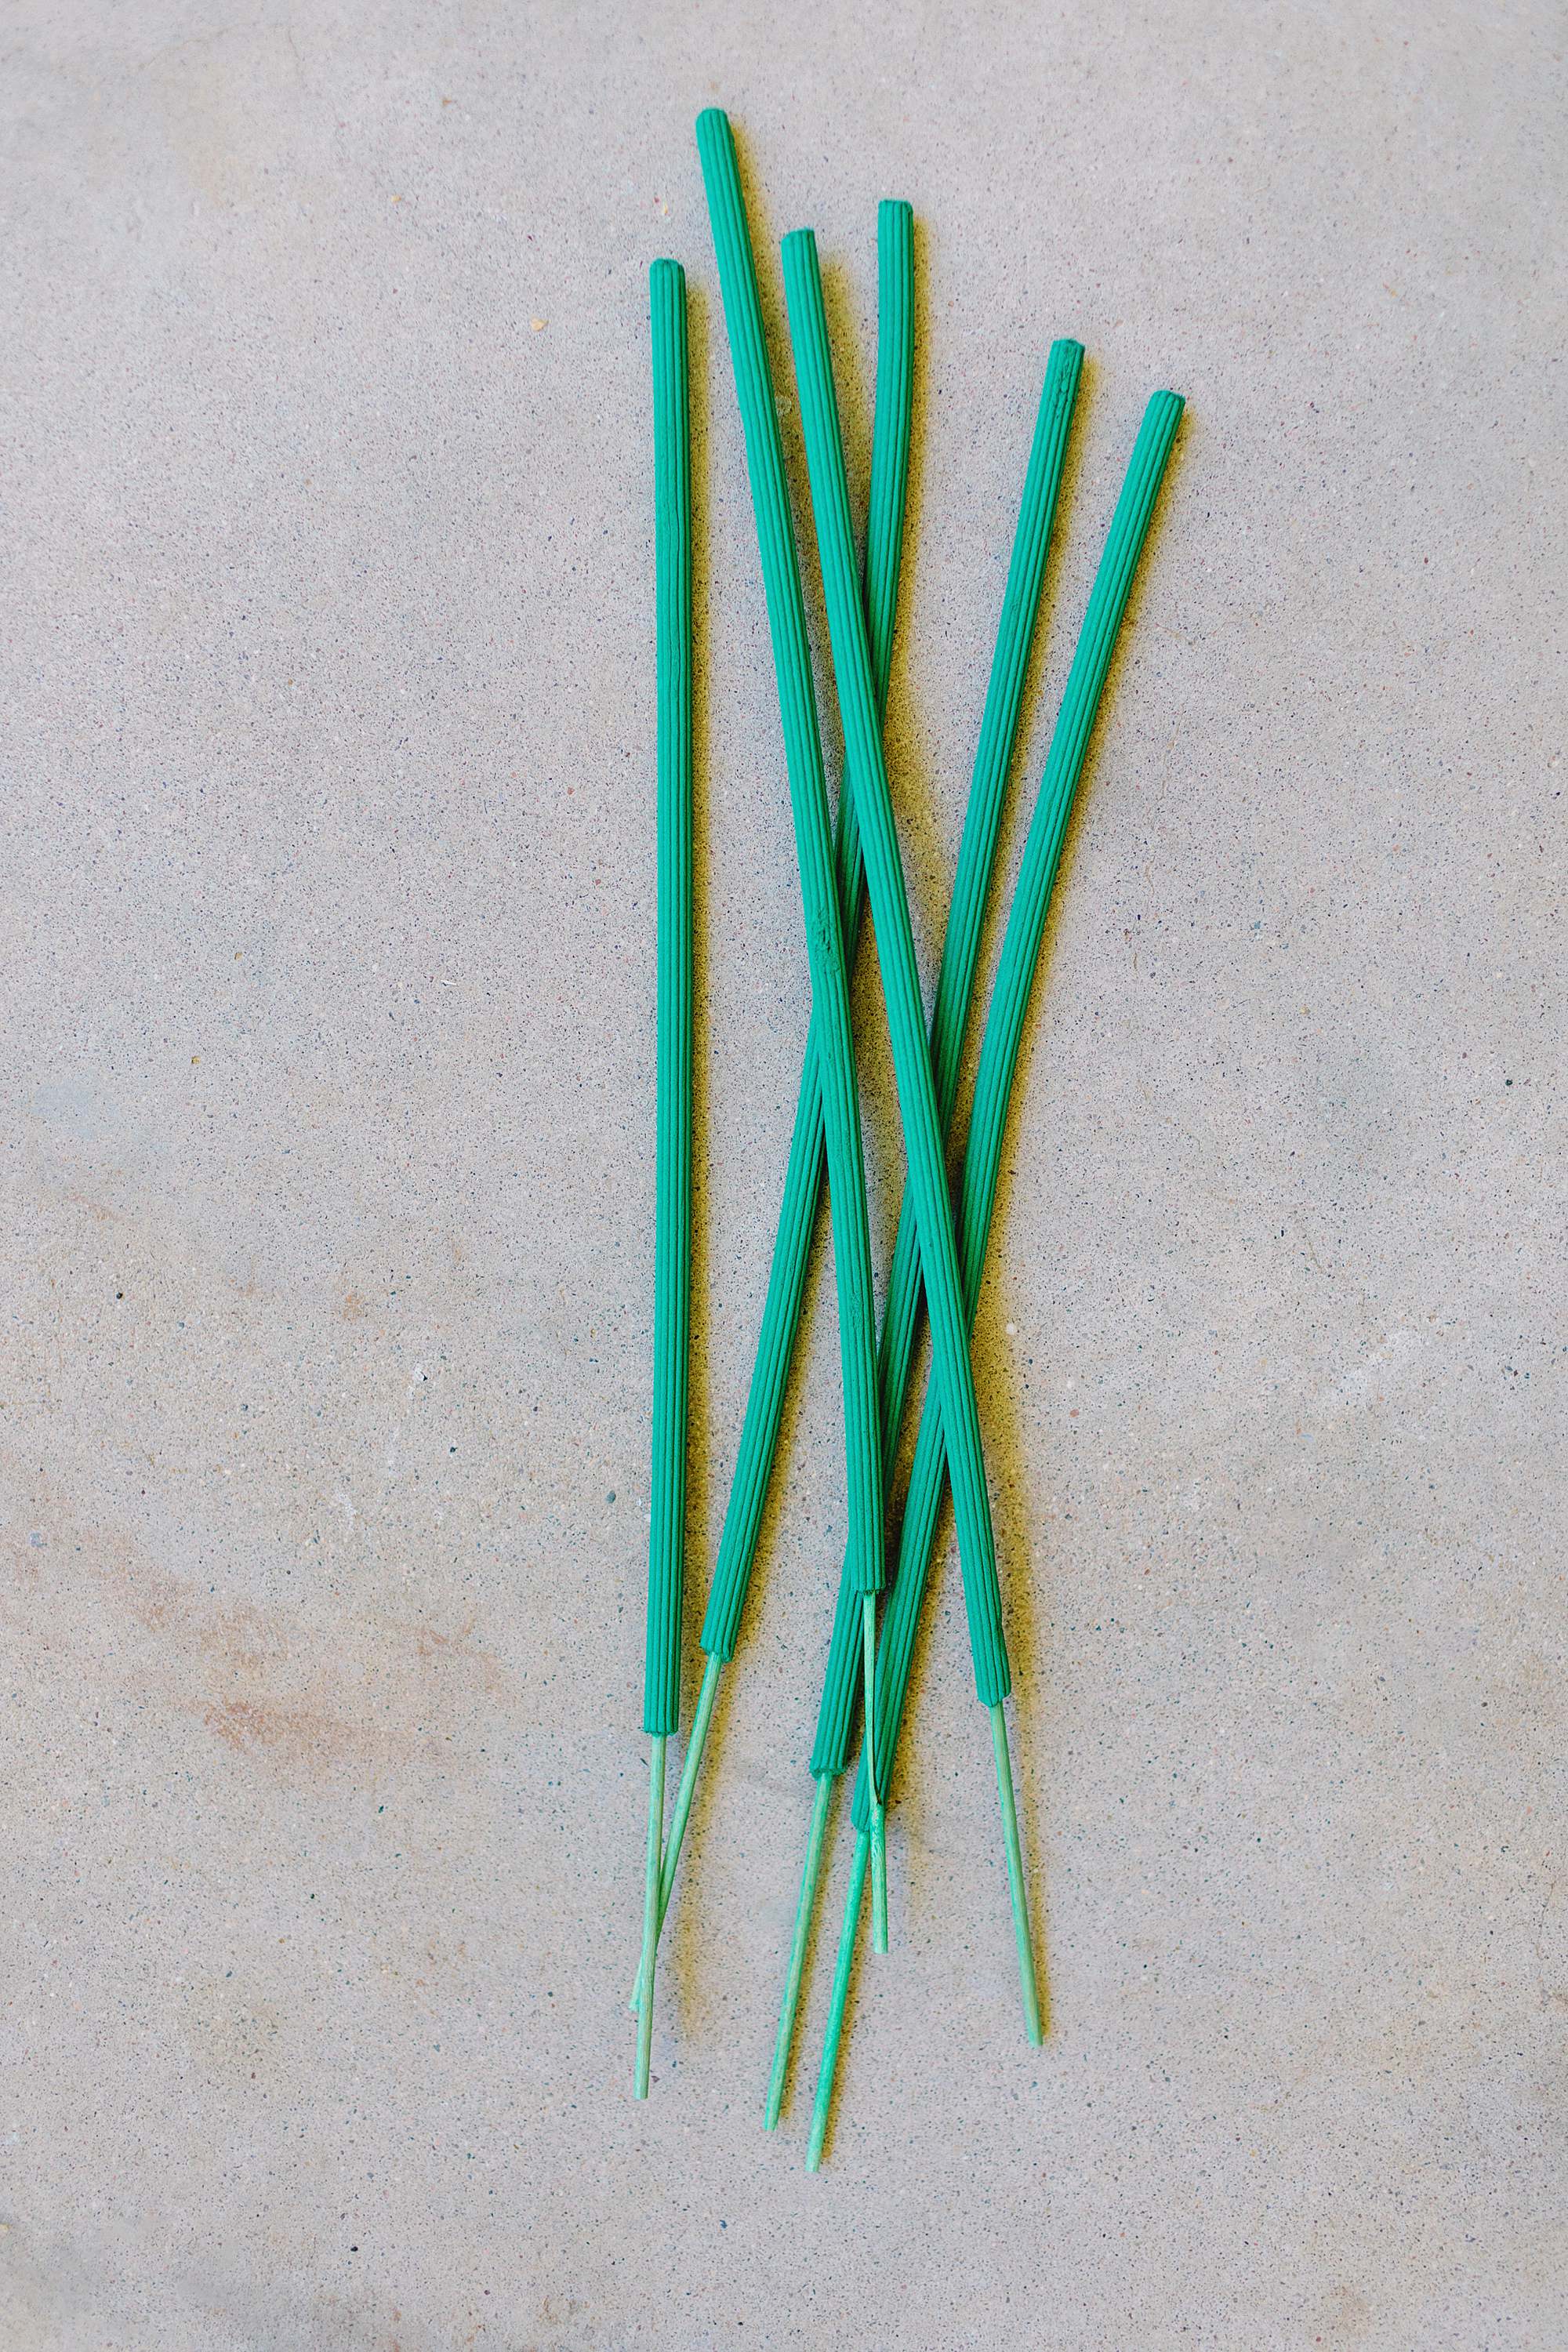 citronella sticks 8 must-have gardening tools found at the 99 cents store - save money so you can buy more plants! #gardeningtips